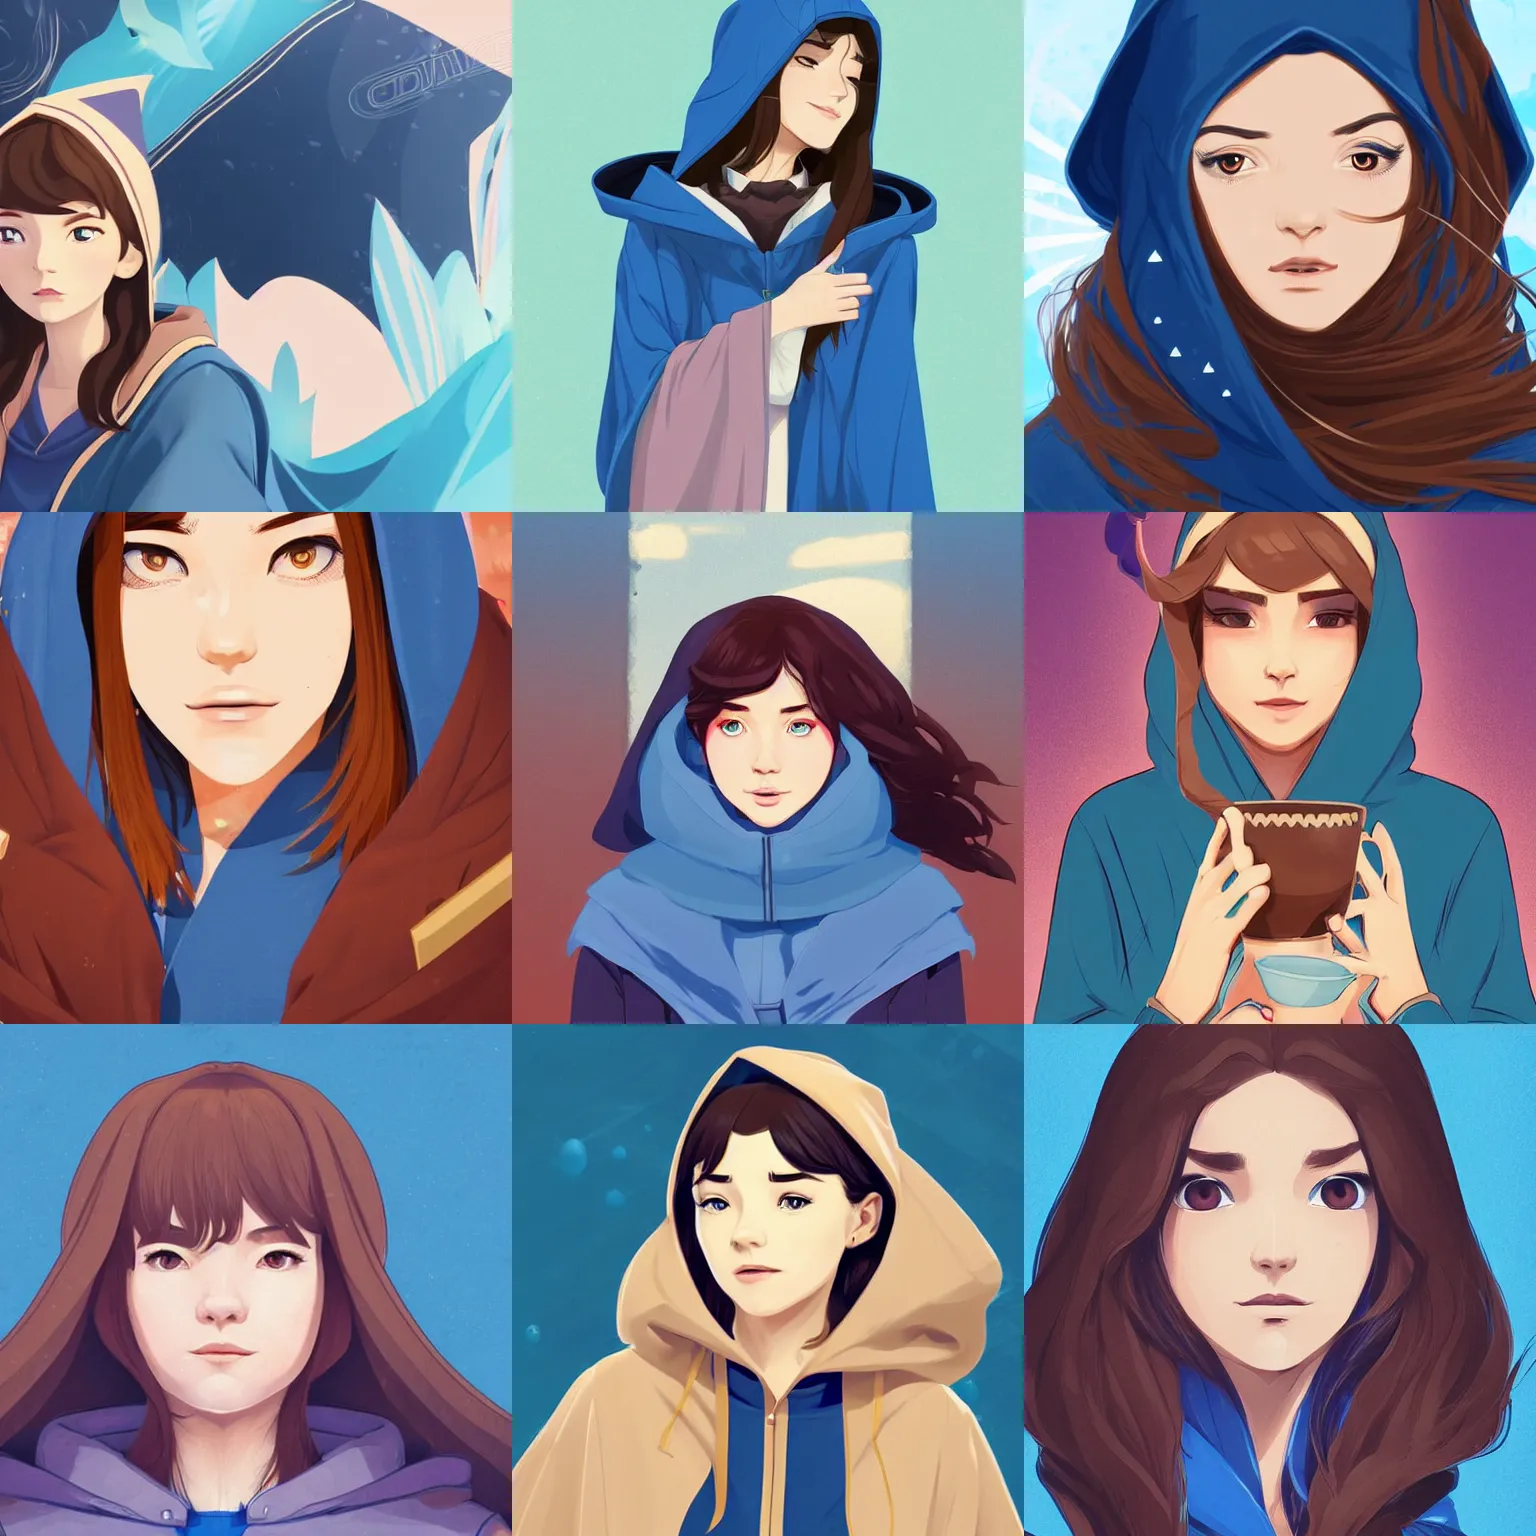 Prompt: portrait of a female wizard with brown hair wearing a blue hood and blue robe, clean cel shaded vector art. shutterstock. behance hd by lois van baarle, artgerm, helen huang, by makoto shinkai and ilya kuvshinov, rossdraws, illustration